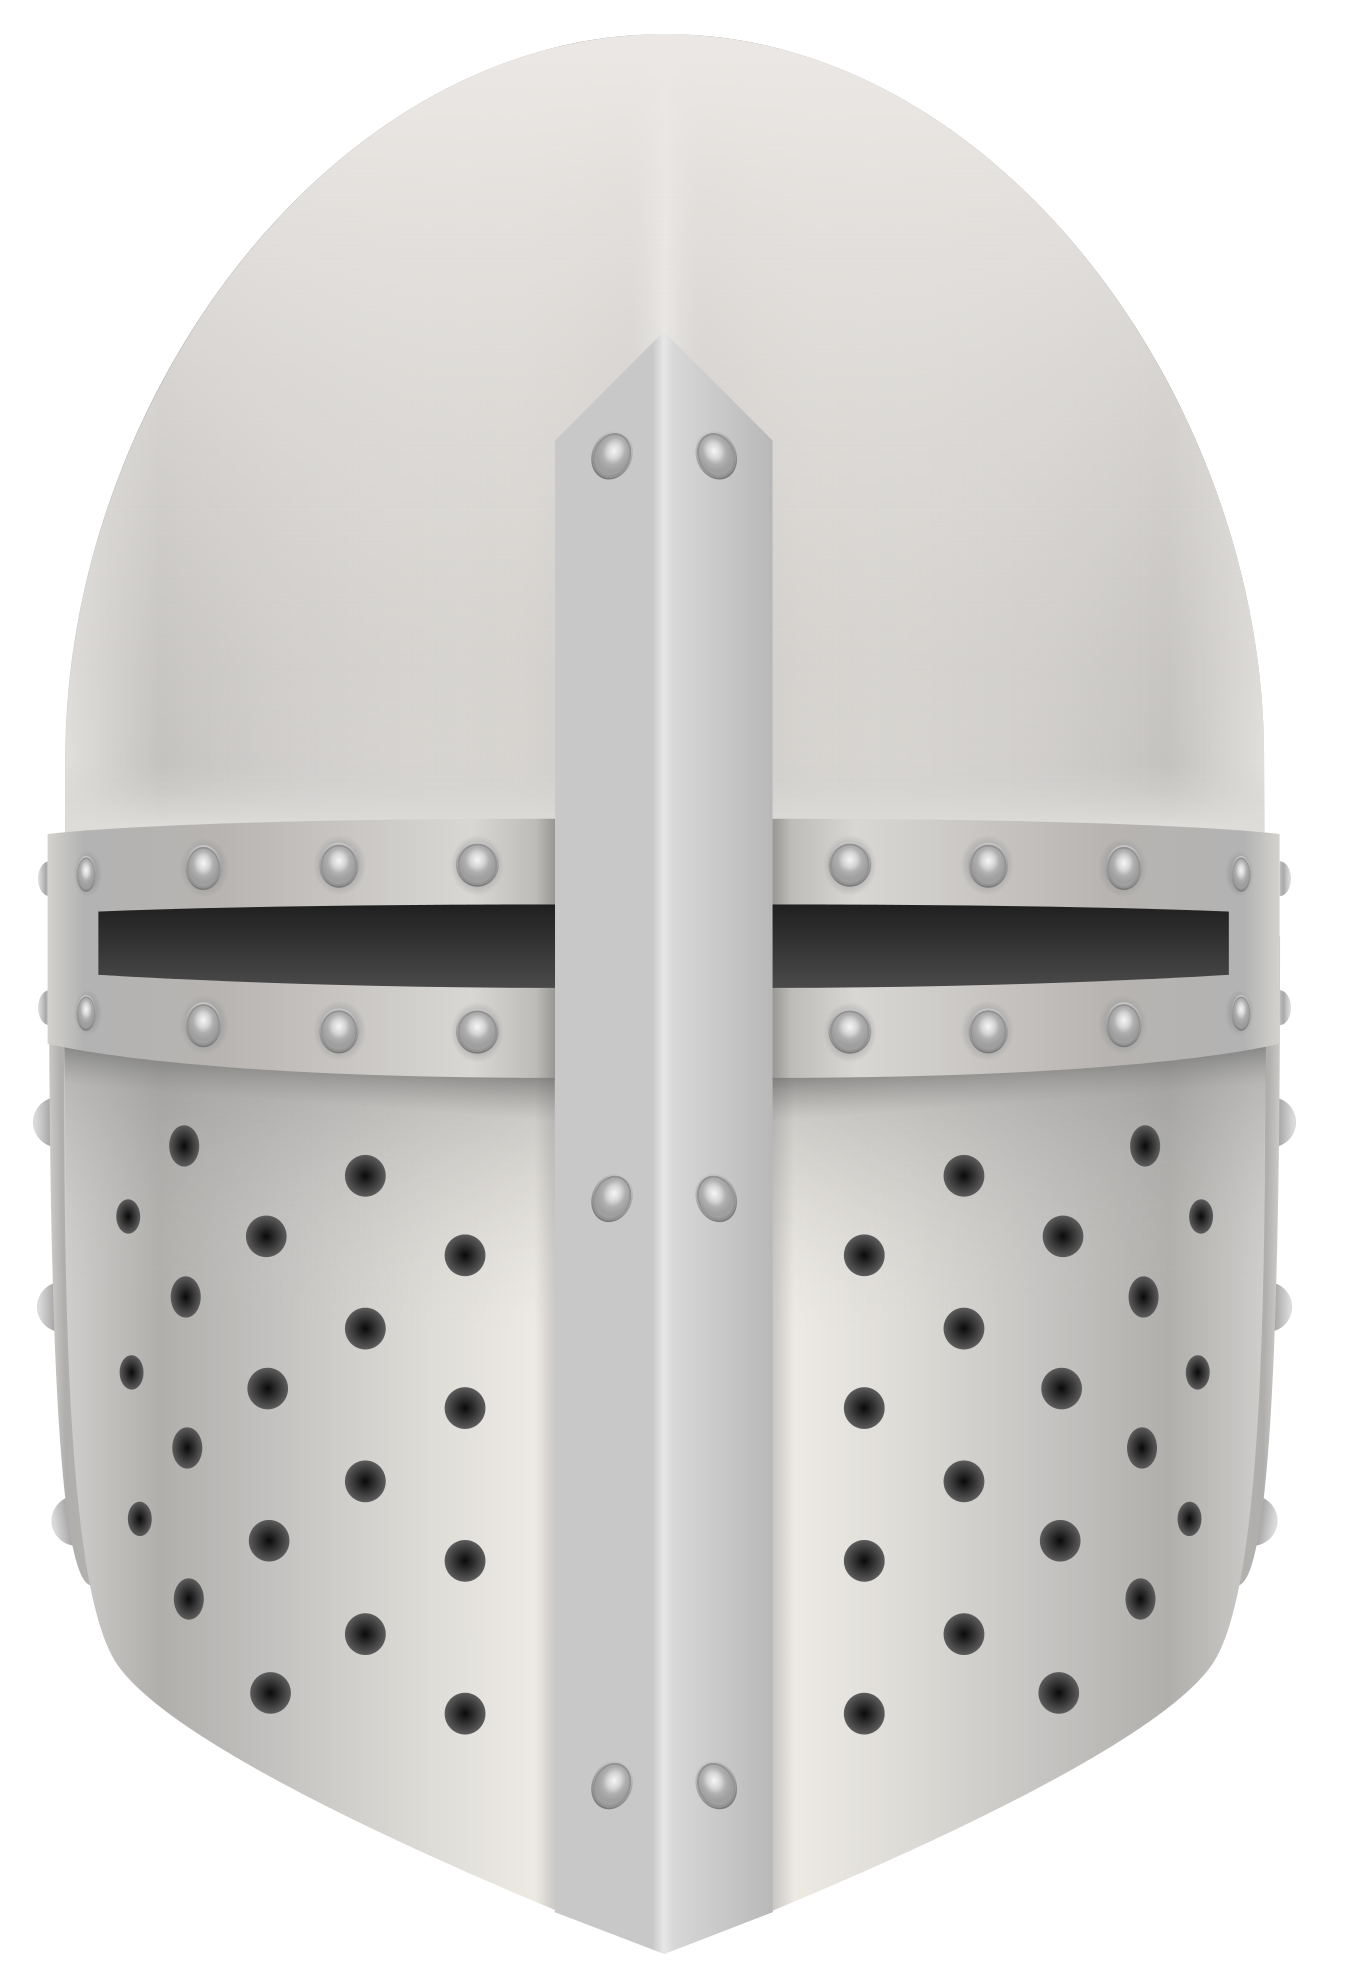 A White Helmet With Holes